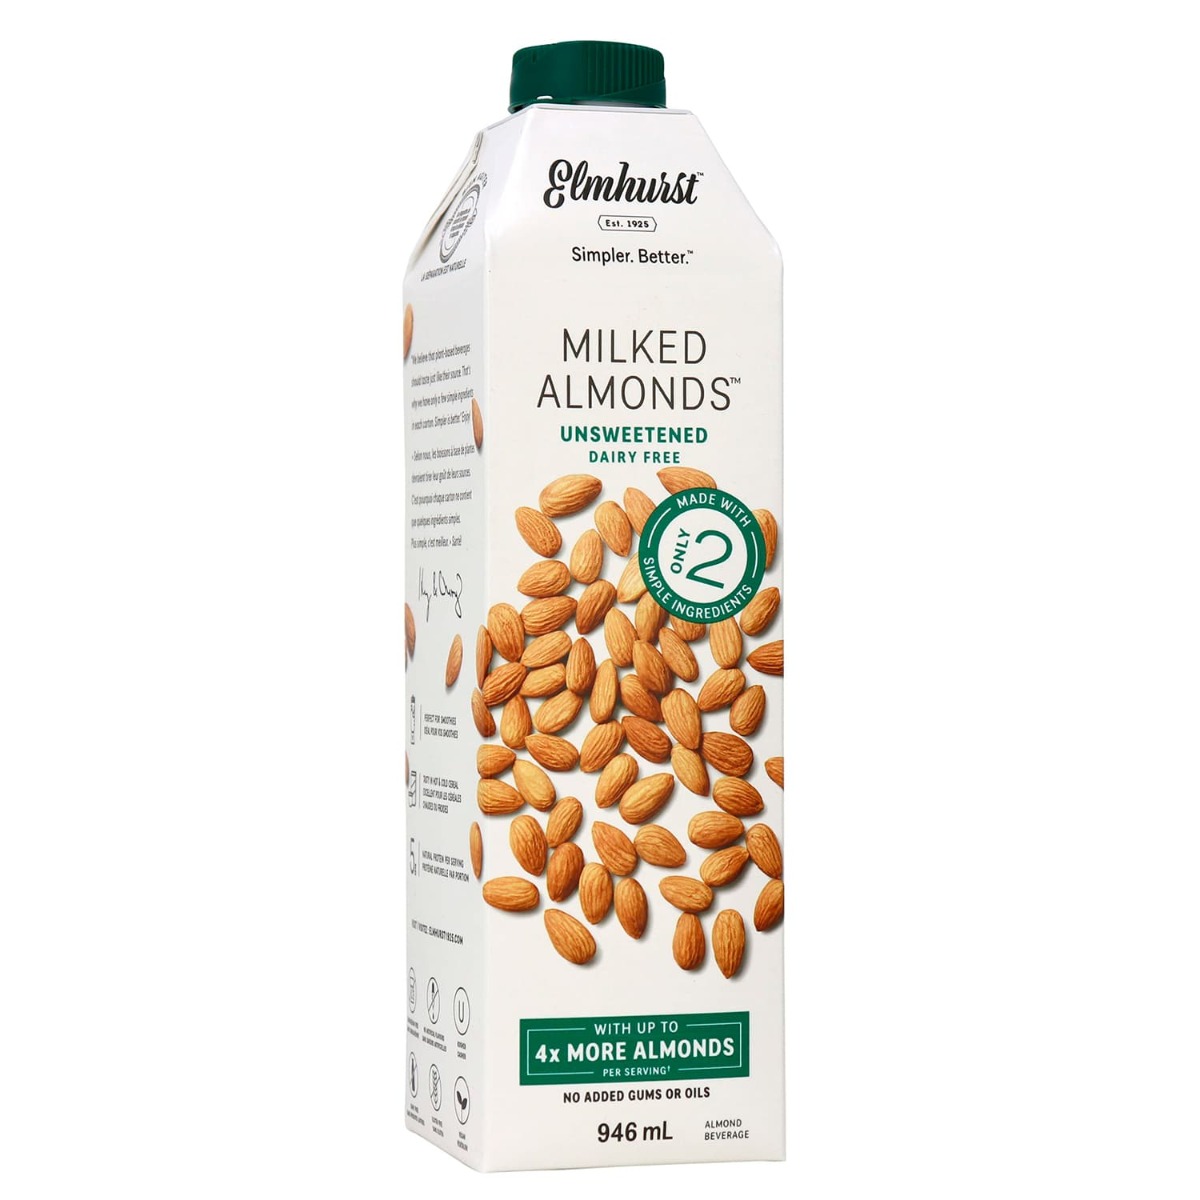 dinuts Simpler. Better L MILKED ALMONDS B UNSW EETENED '"::: DAIRY FREE e P el e g Ruticg e J2 ey 1o I o 4x MORE ALMONDS :: g C NO ADDED GUMS OR OILS Q : " ALMOND 2 946 mL e 